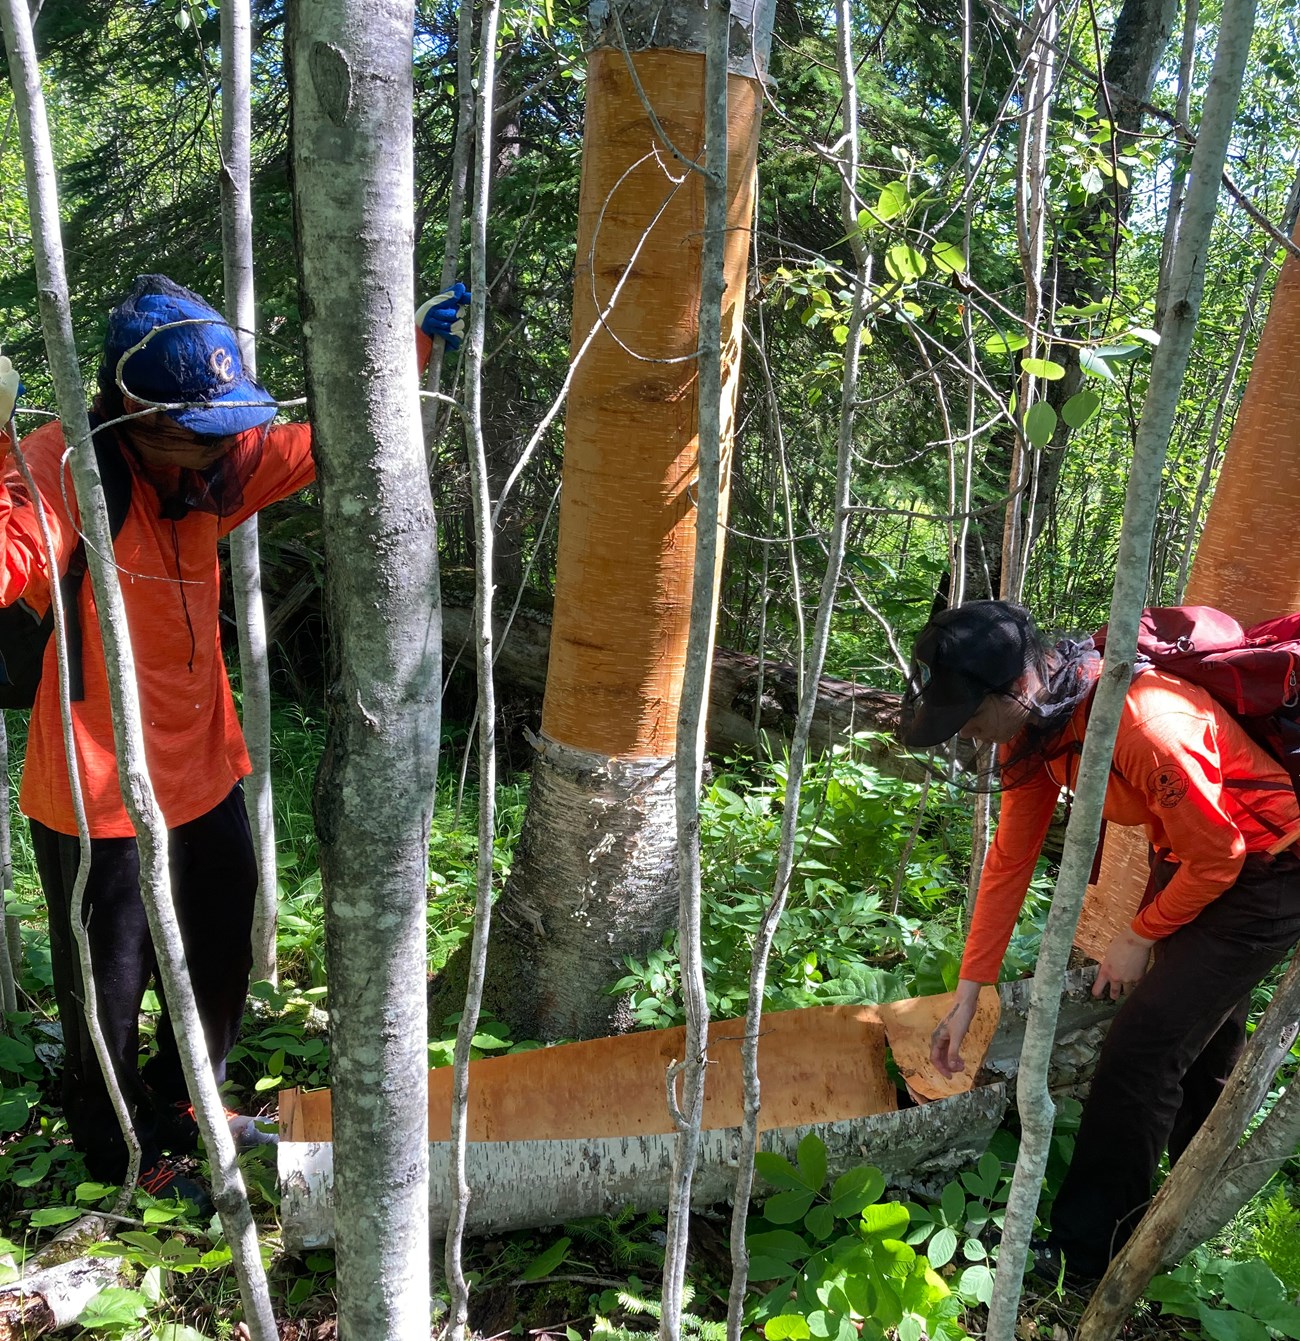 Two people dressed in orange shirts and head nets are gathering birch bark from trees.